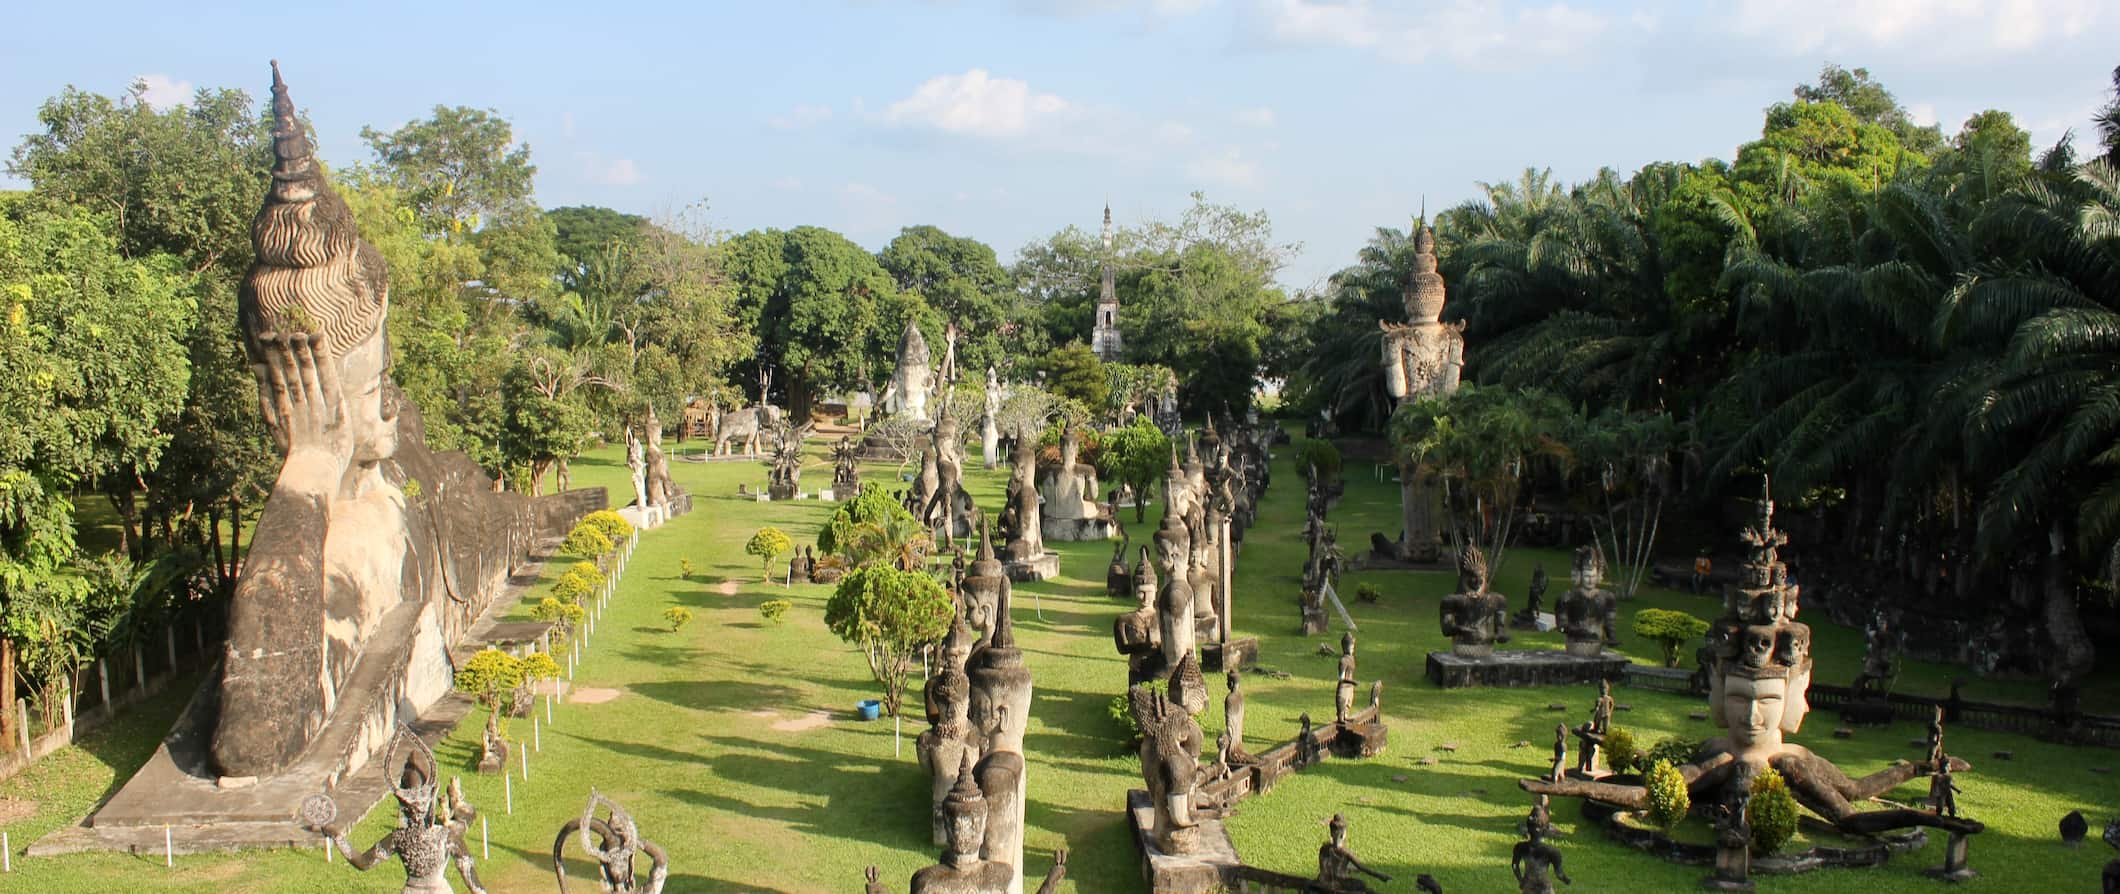 Dozens of Buddhist and Hindu states at Buddha Park near Vientiane, Laos surrounded by grass and trees